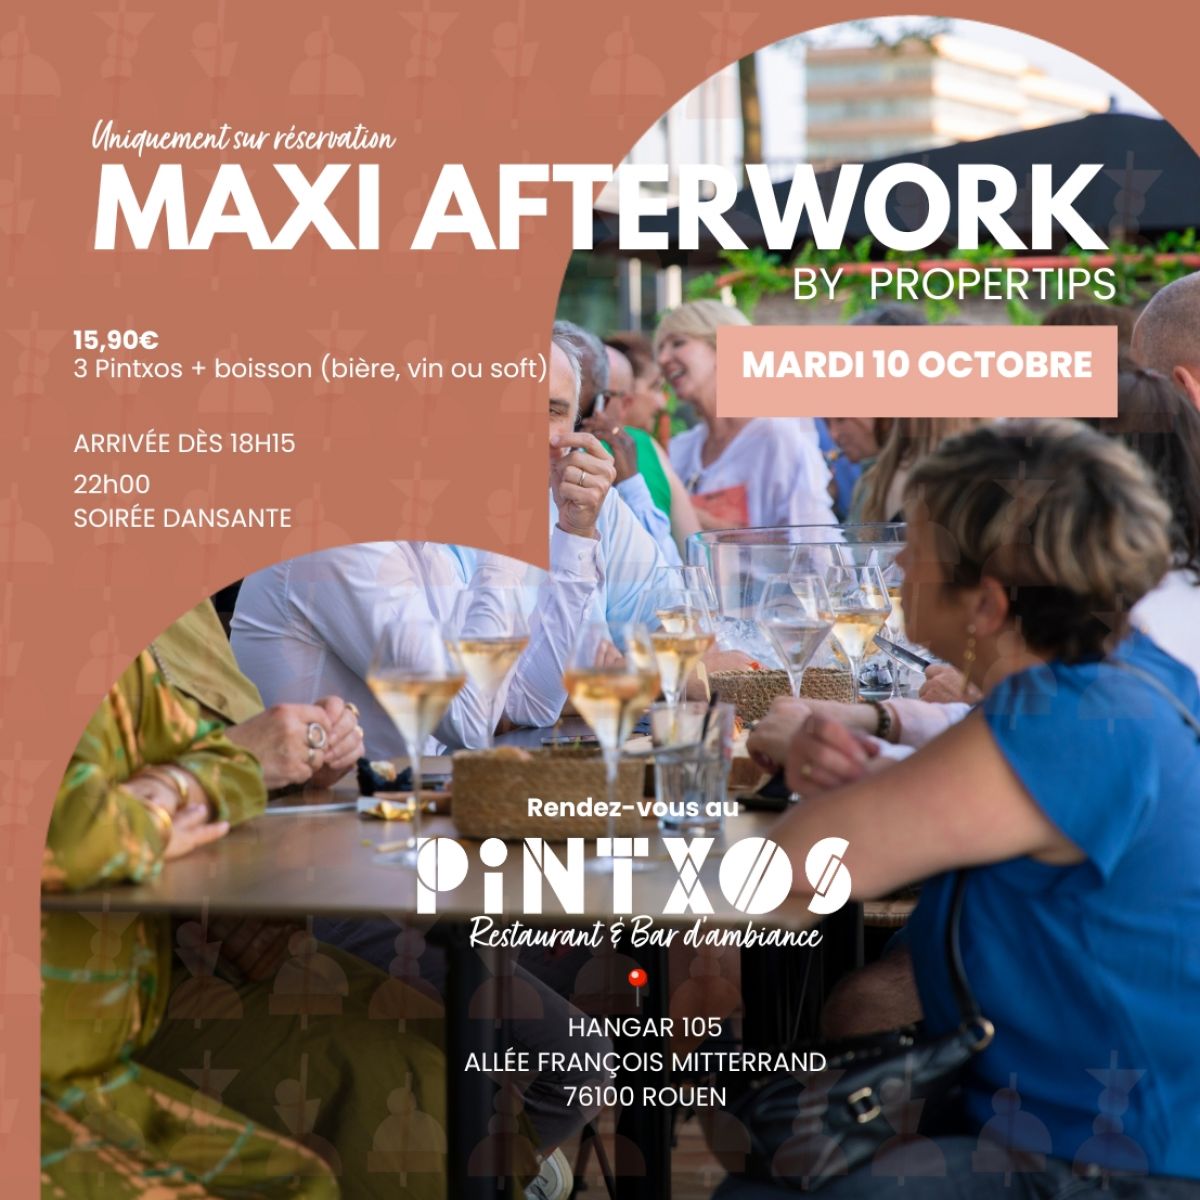 Maxi Afterwork by Propertips